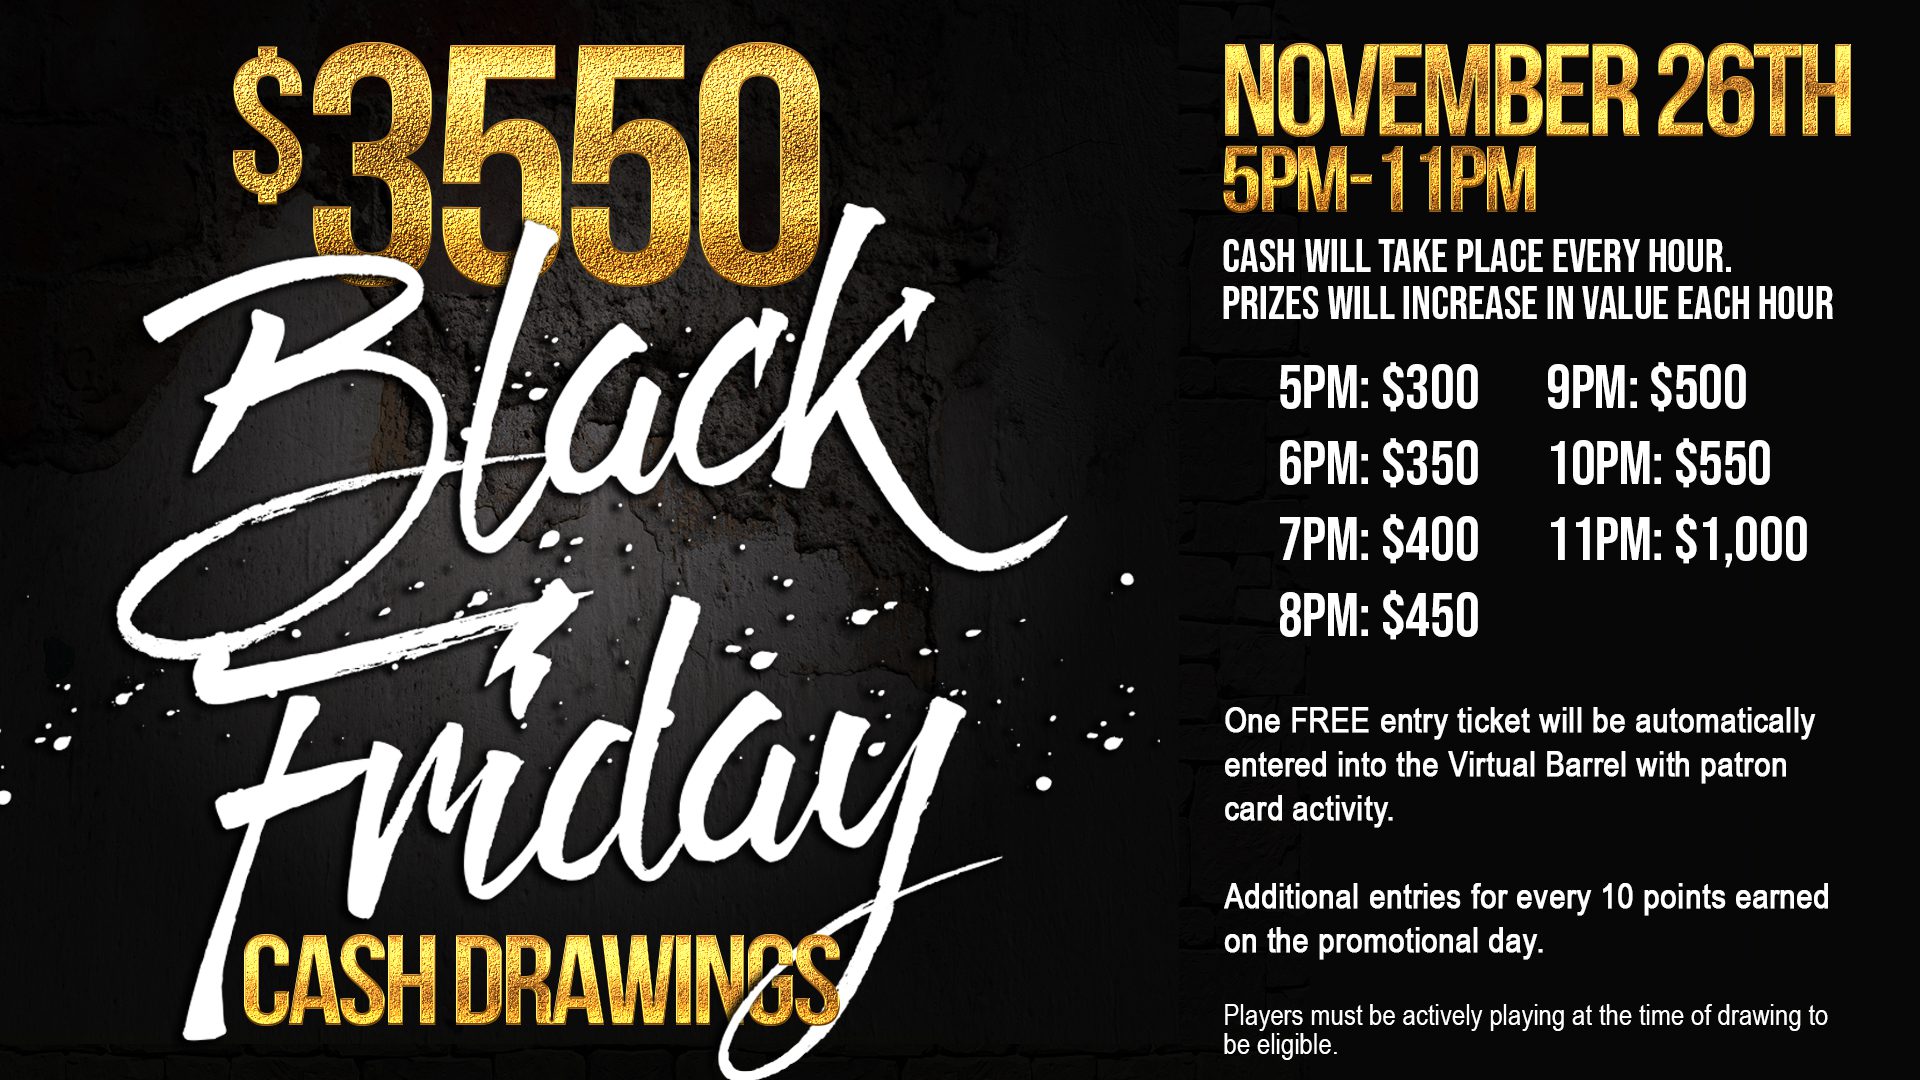 Advertisement for black friday cash drawings event with increasing prize amounts from 5 pm to 11 pm, including information on eligibility and automatic entry with patron card.